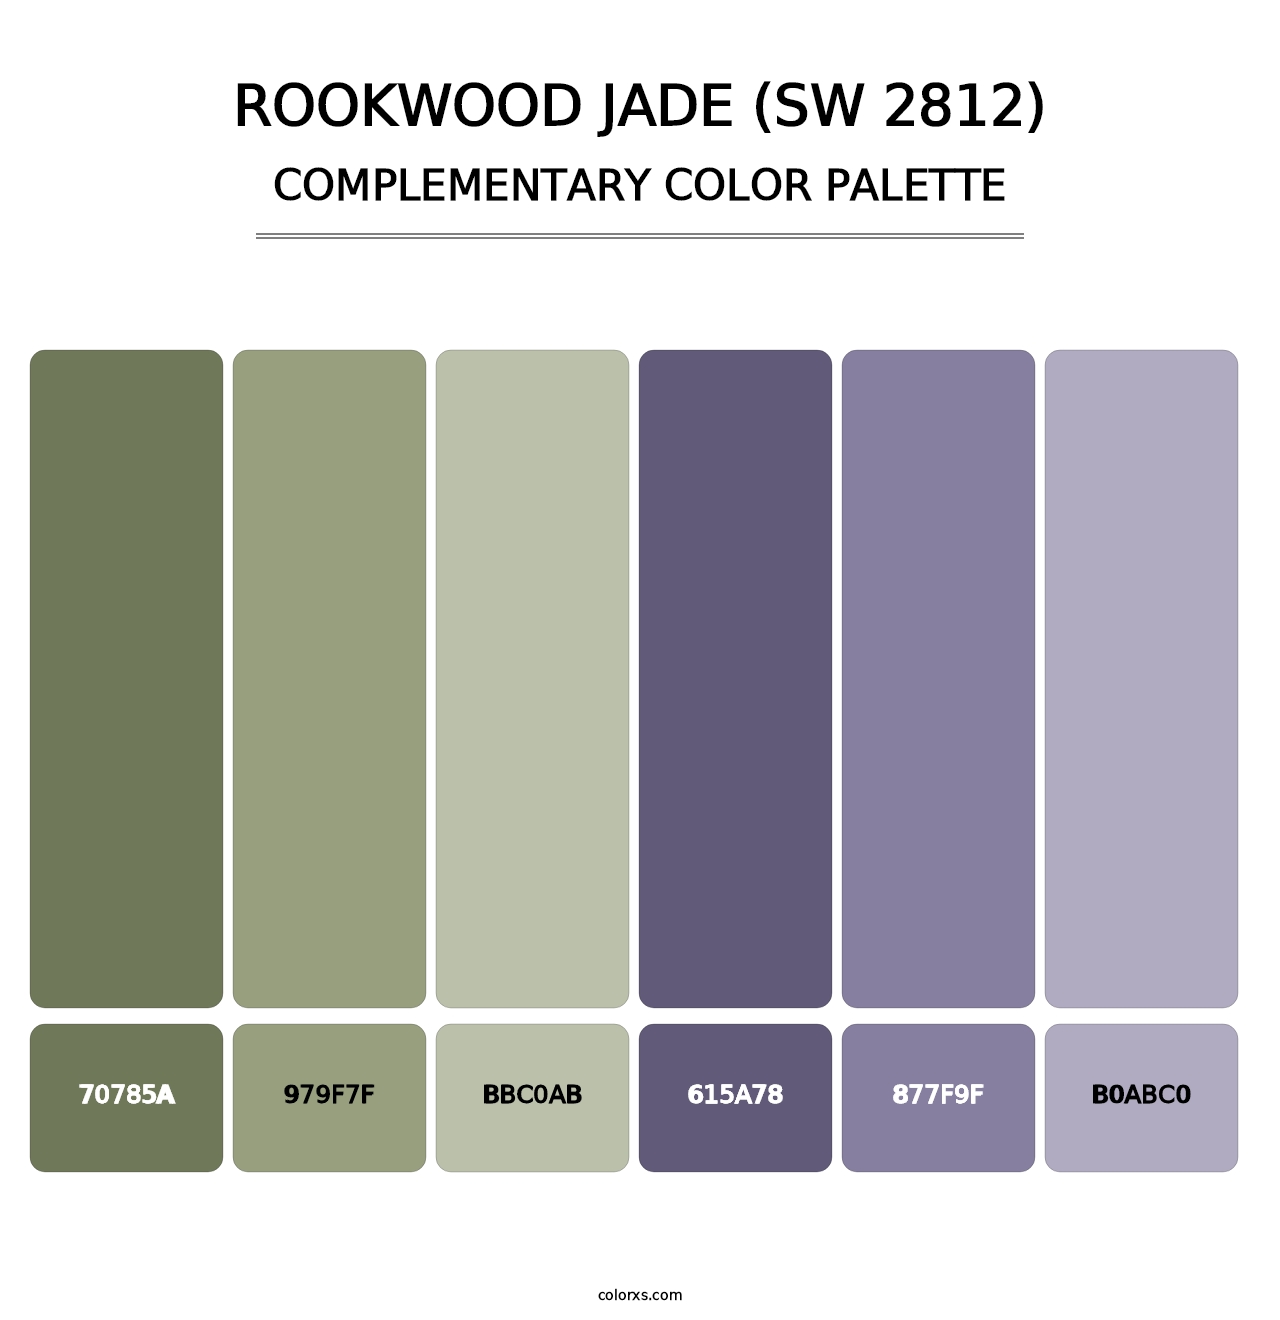 Rookwood Jade (SW 2812) - Complementary Color Palette